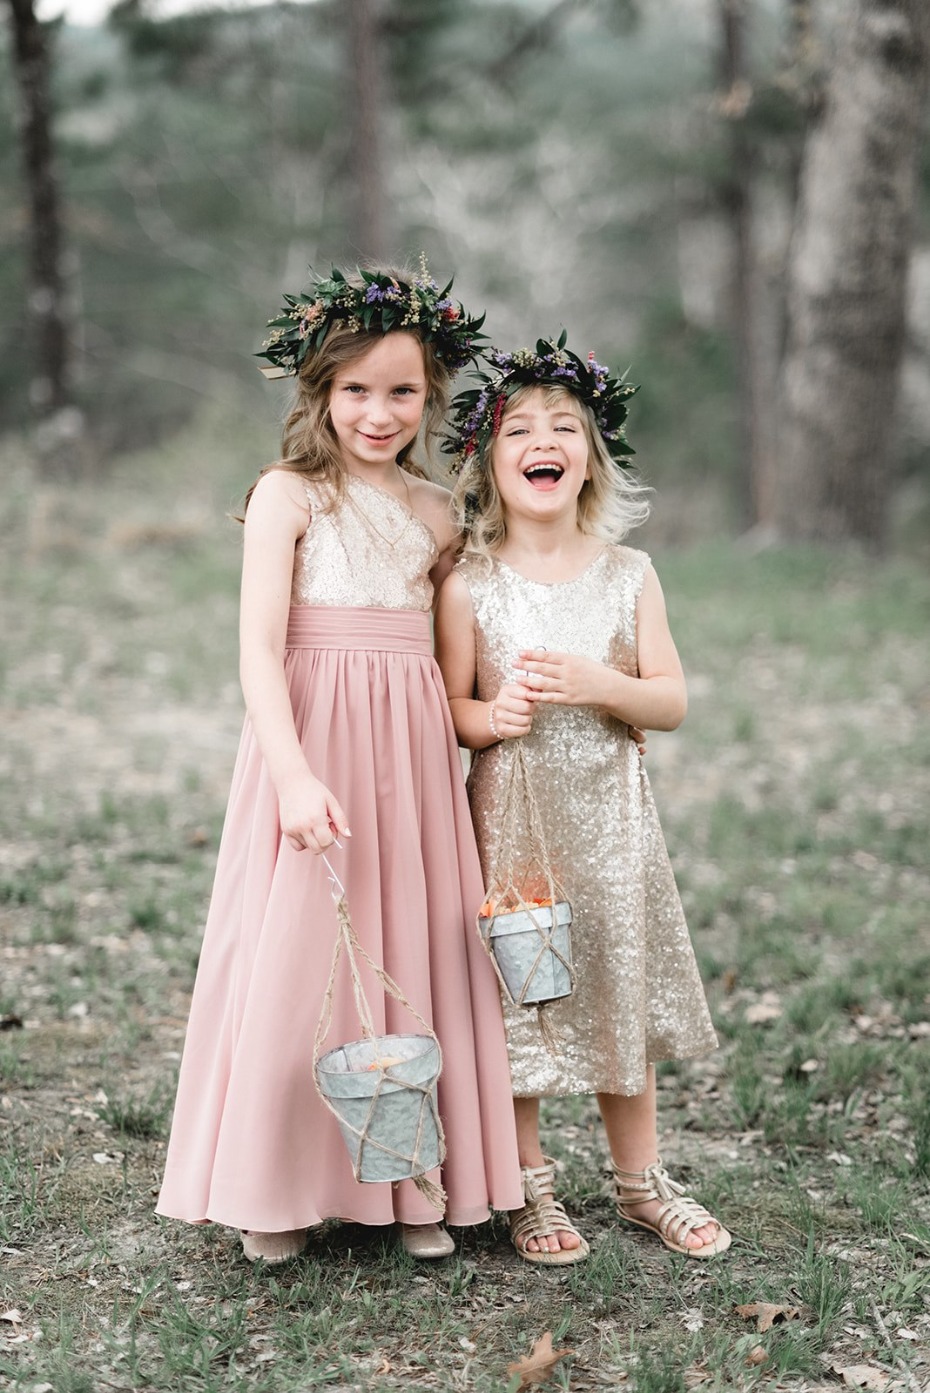 Cute flower girls in sparkly dresses